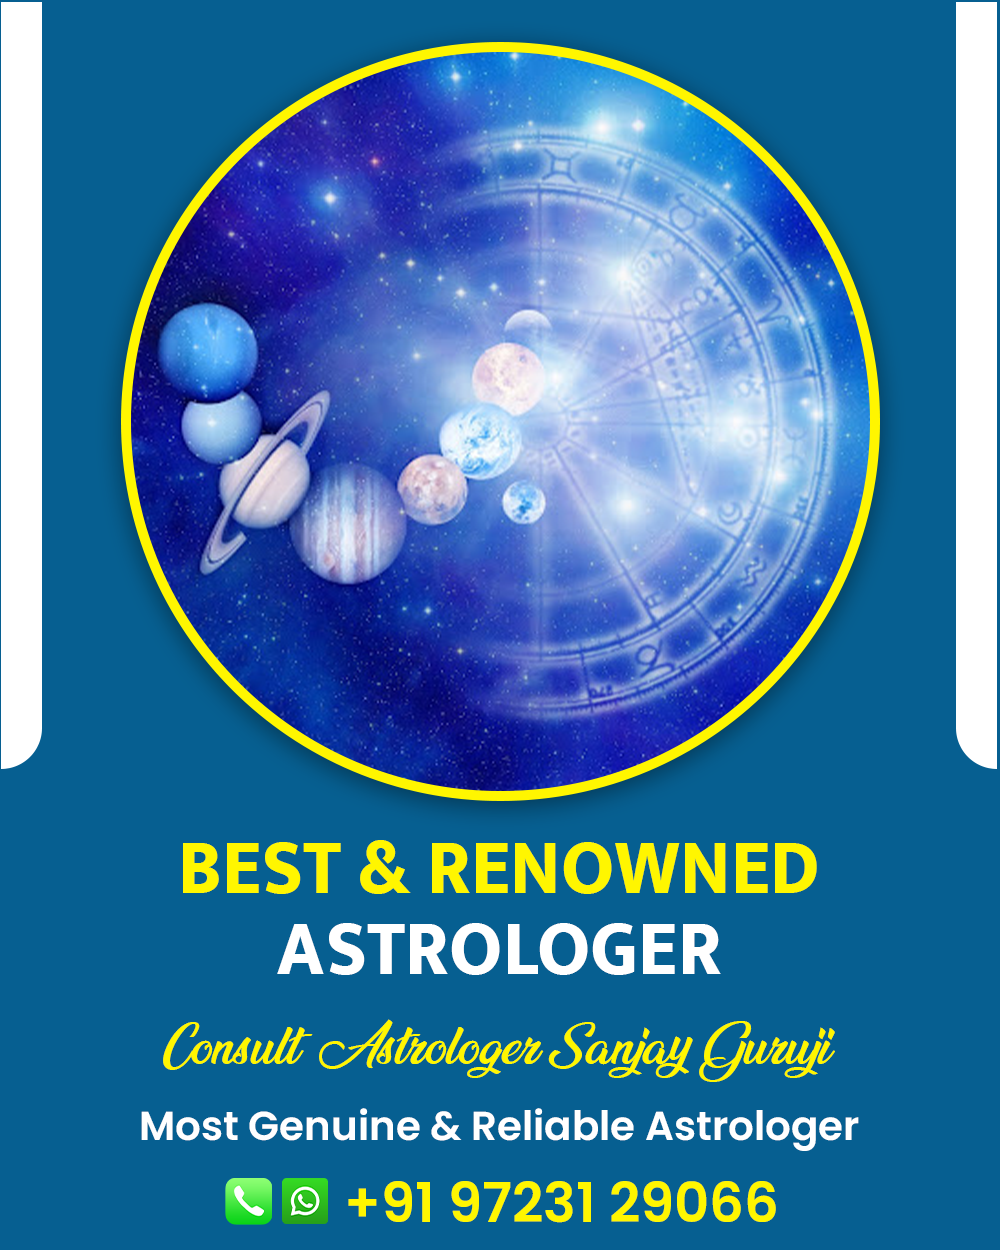 Astrologer in Anand